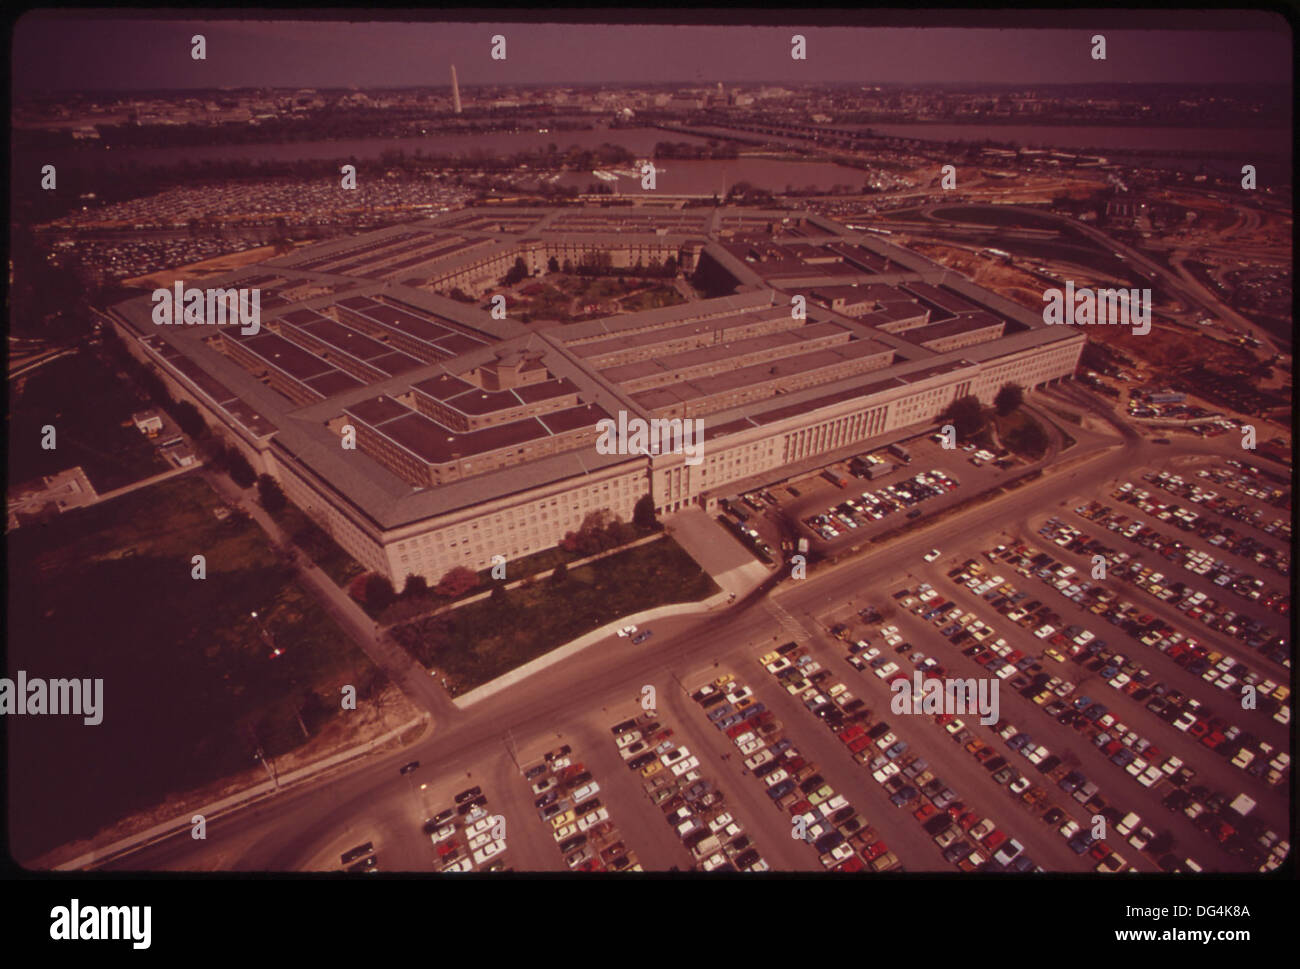 AERIAL VIEW OF THE PENTAGON AND ONE OF ITS PARKING FIELDS 547244 Stock Photo